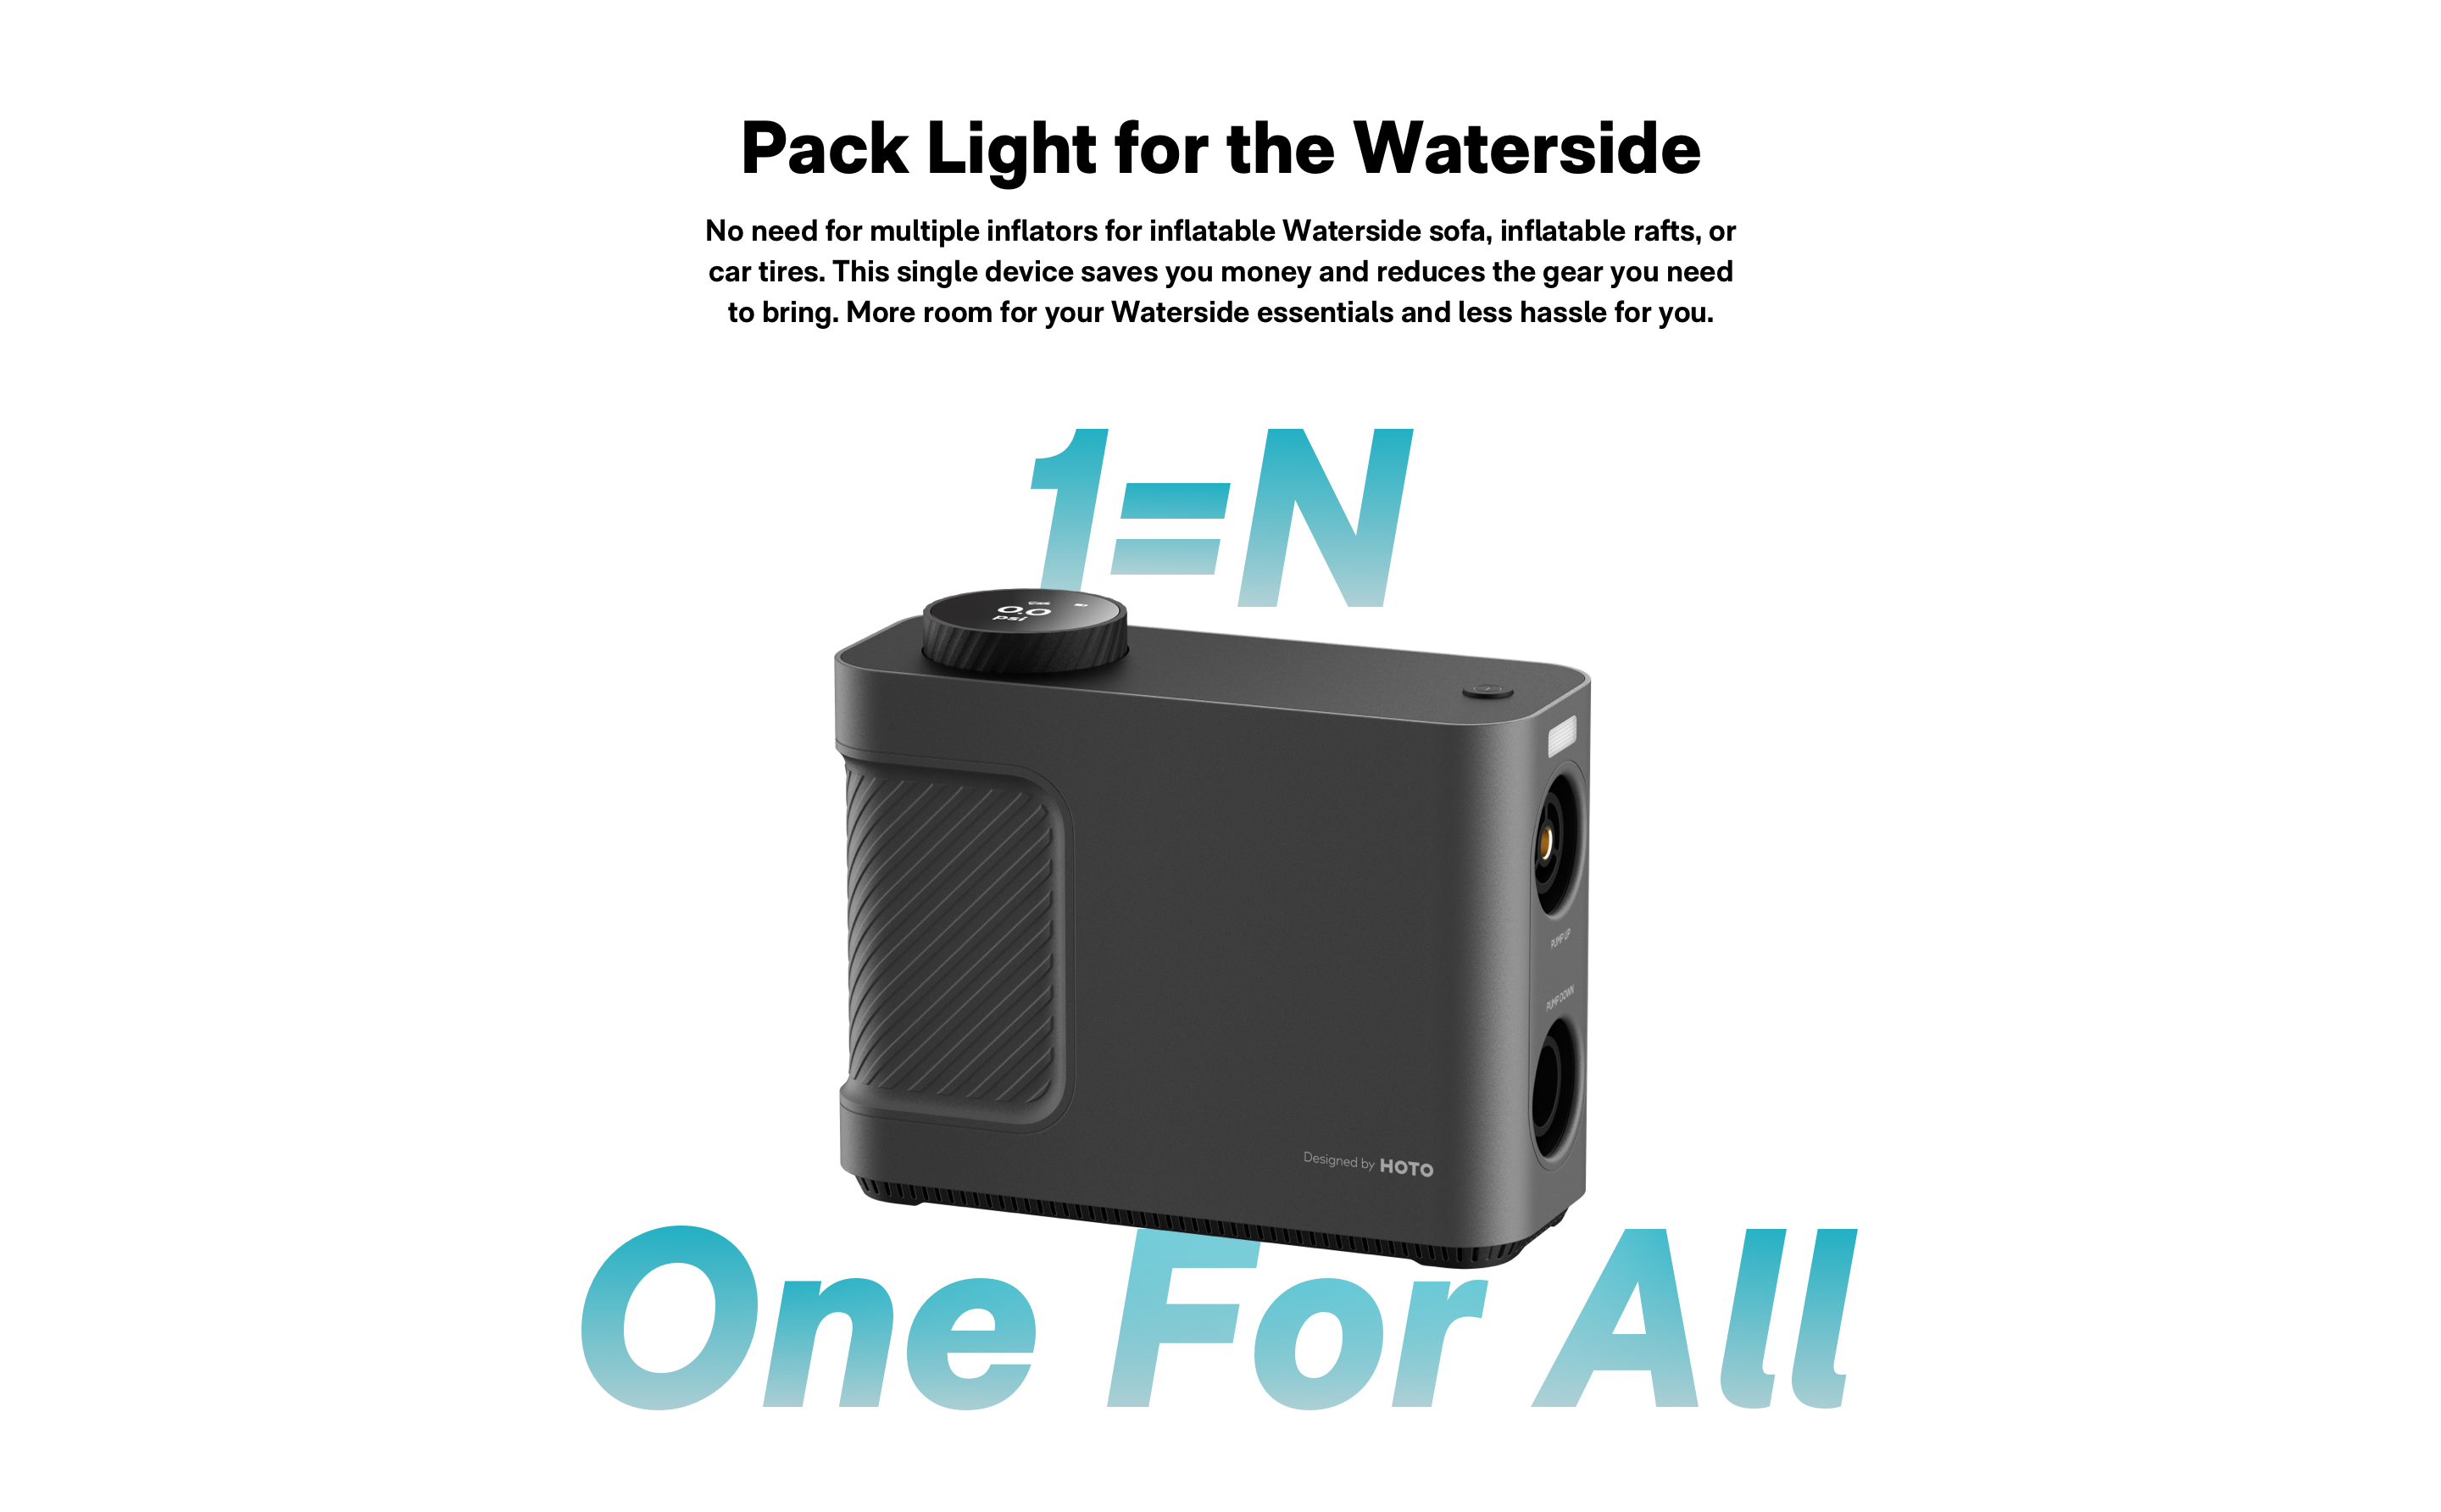 3 in 1 Air pump master: Pack Light or the Waterside